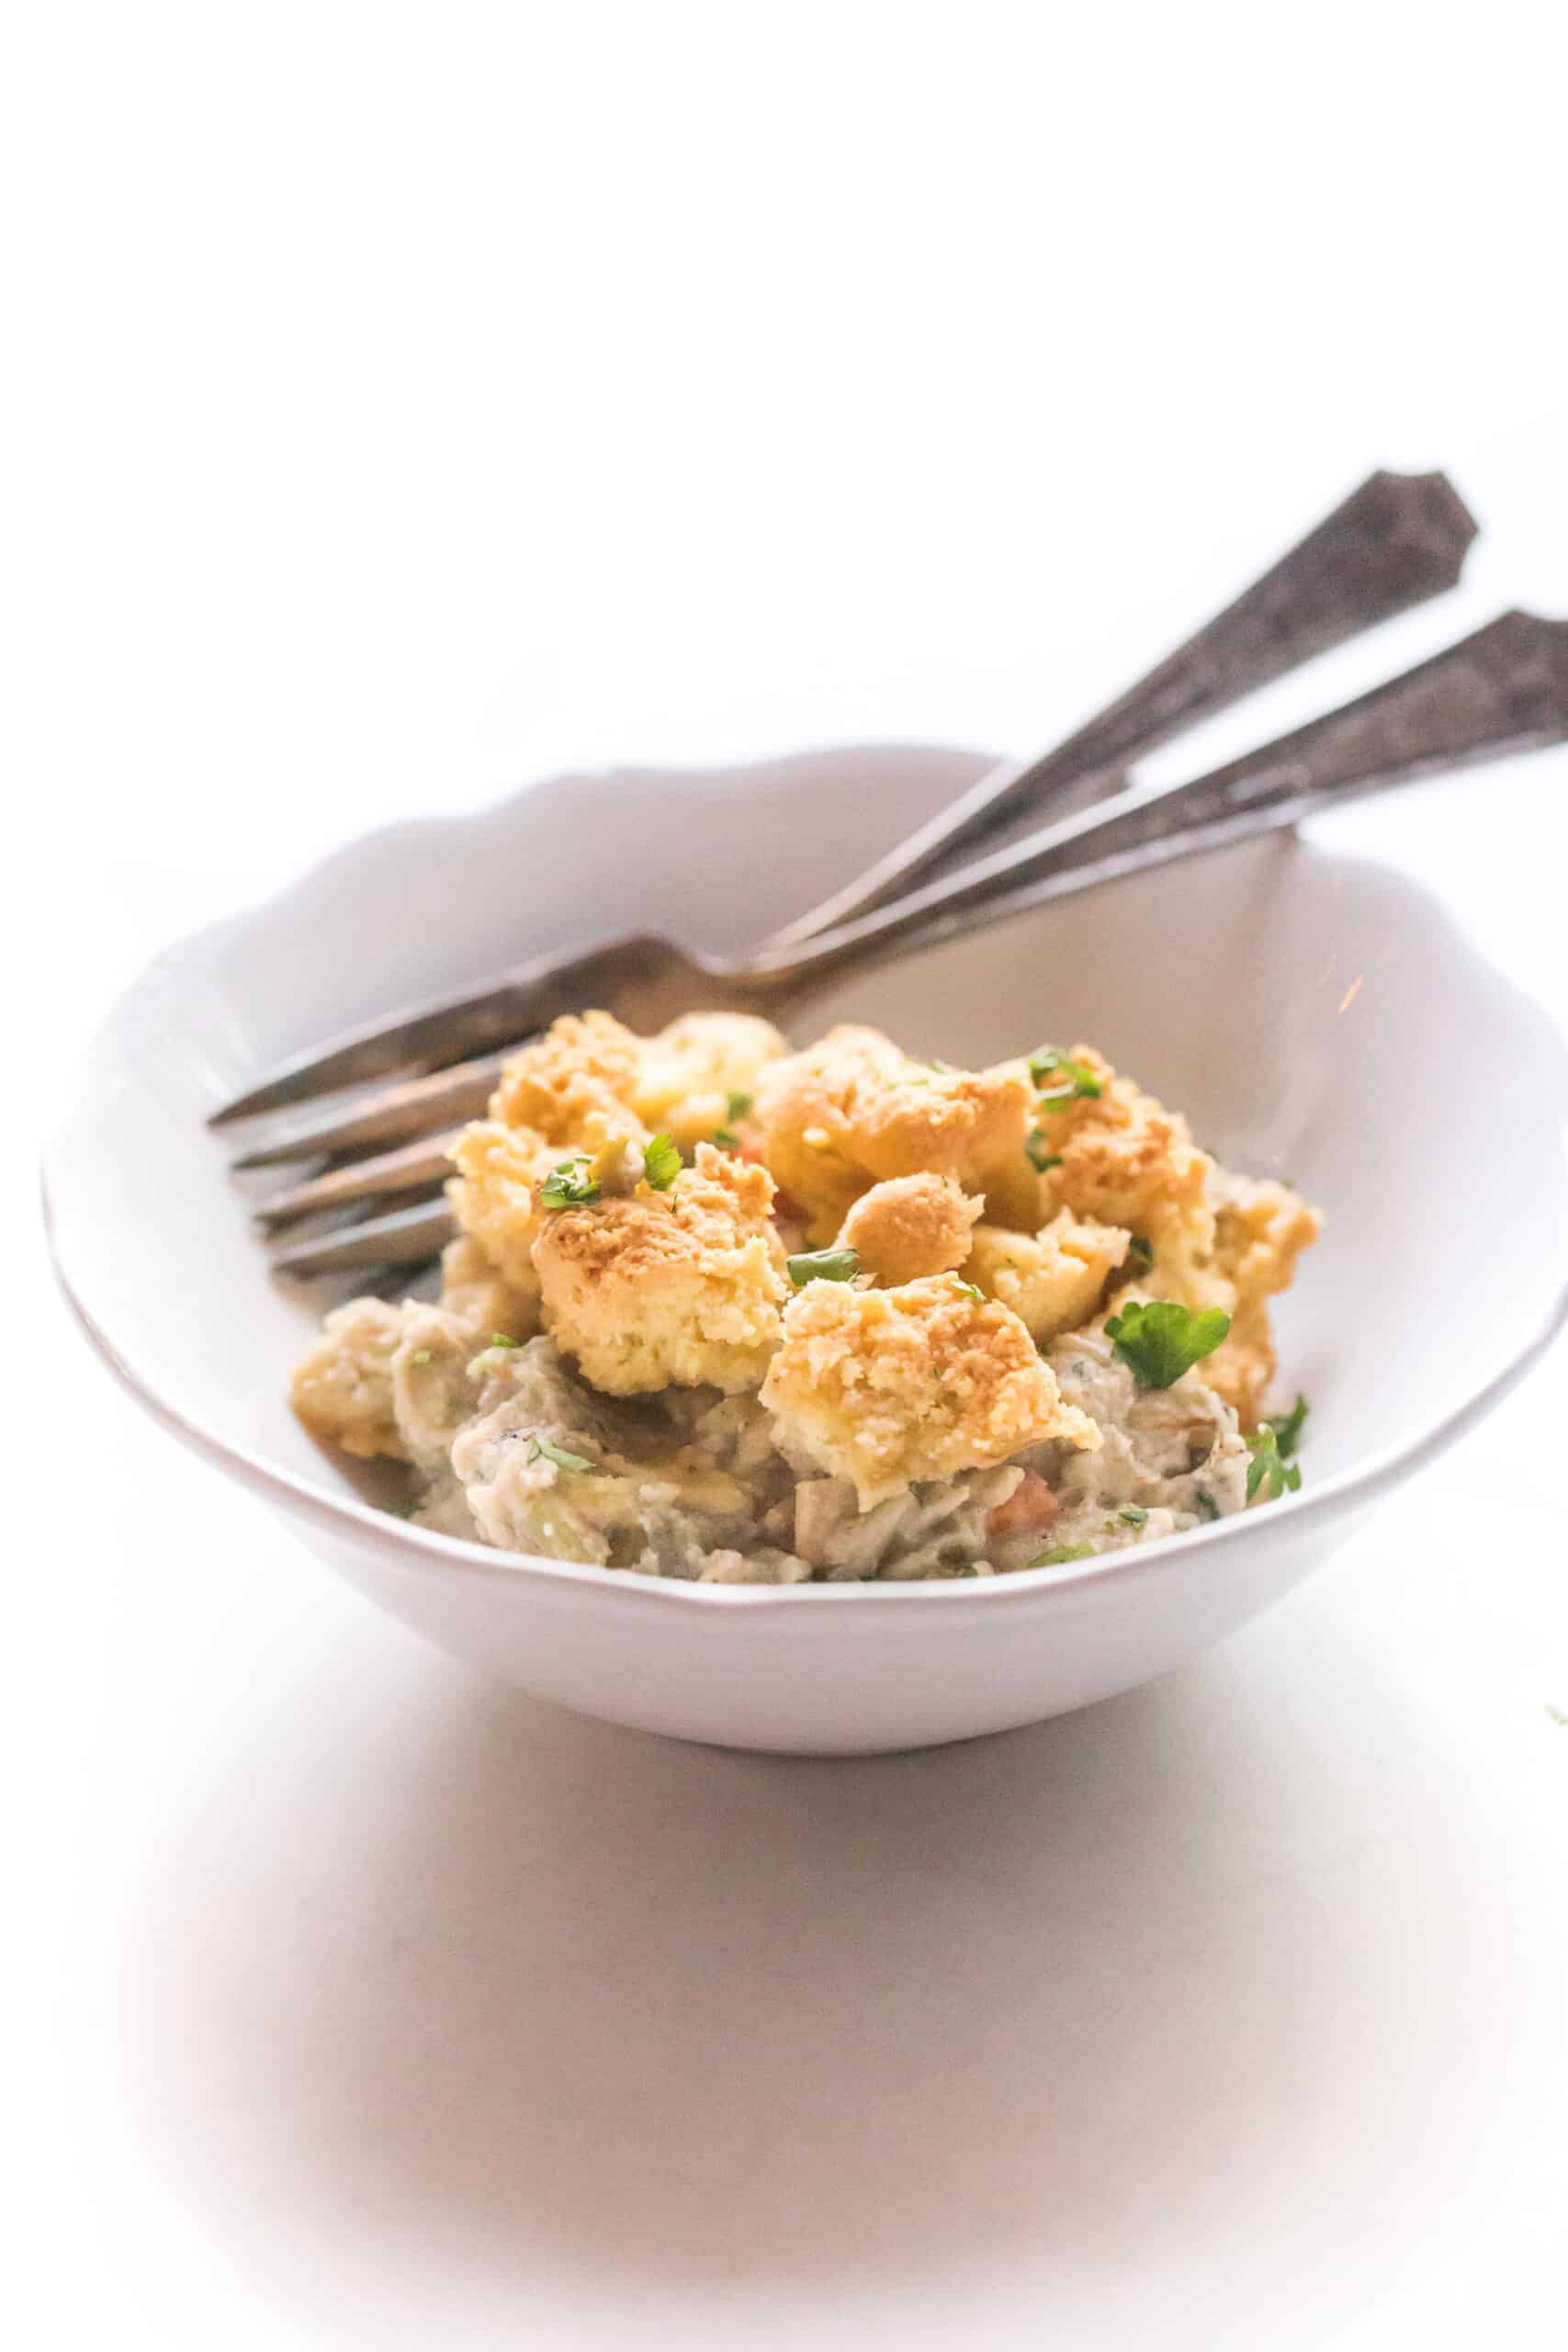 keto chicken pot pie crumble in a white bowl on a white background